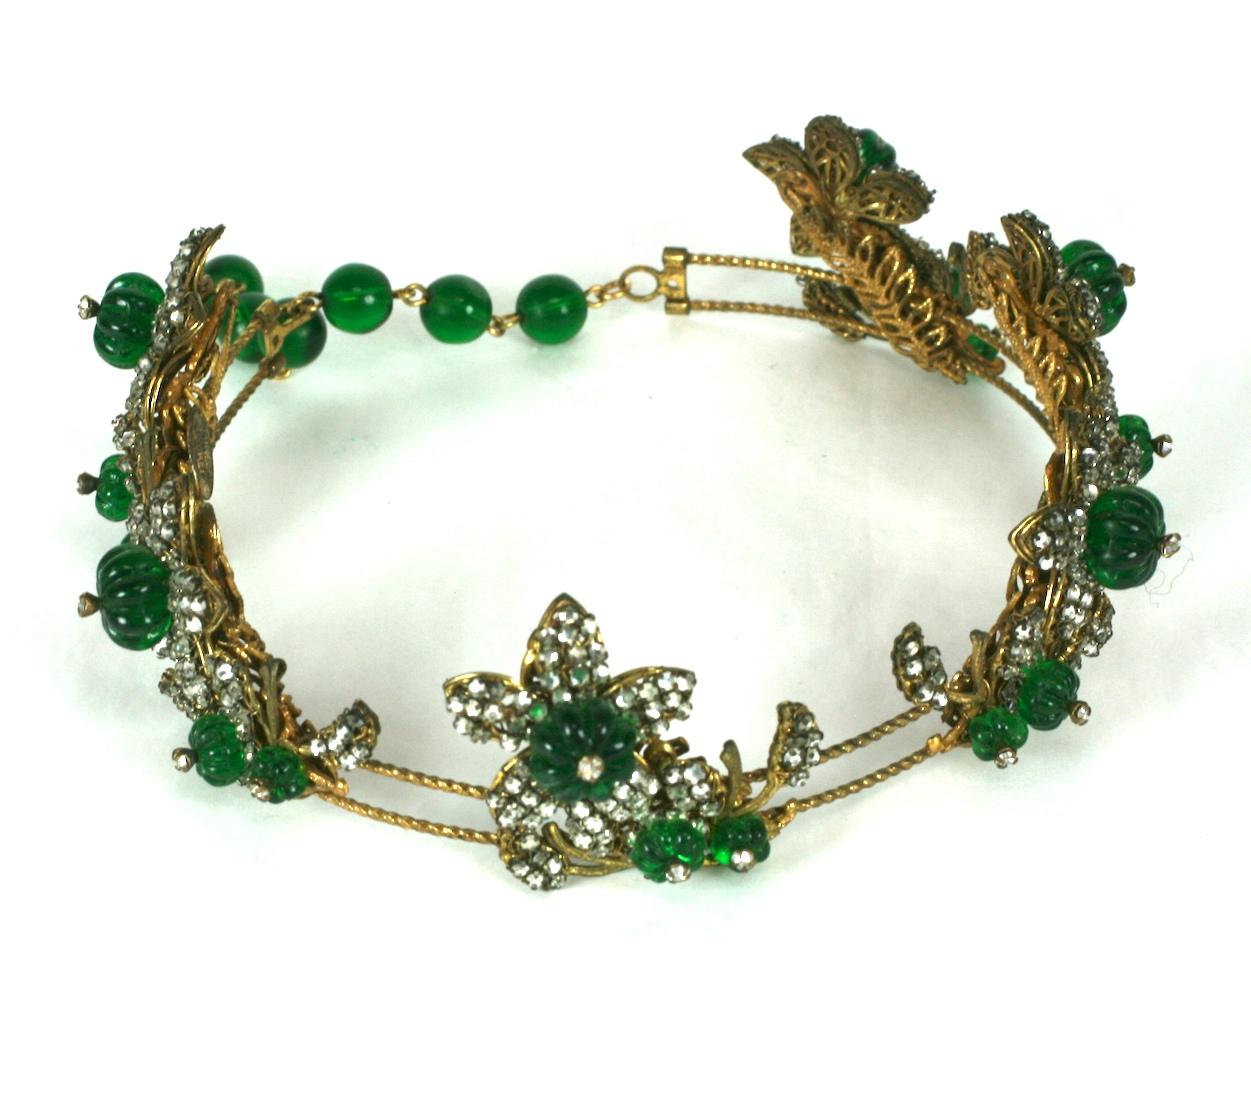 Rare Miriam Haskell Elaborate 1930's Cut Melon Bead Tiara-Collar. Extremely elaborate hand wired floriform stations are decorated with emerald cotele beads and hundreds of crystal rose montees on a rigid wire collar. Bead extension on back allows